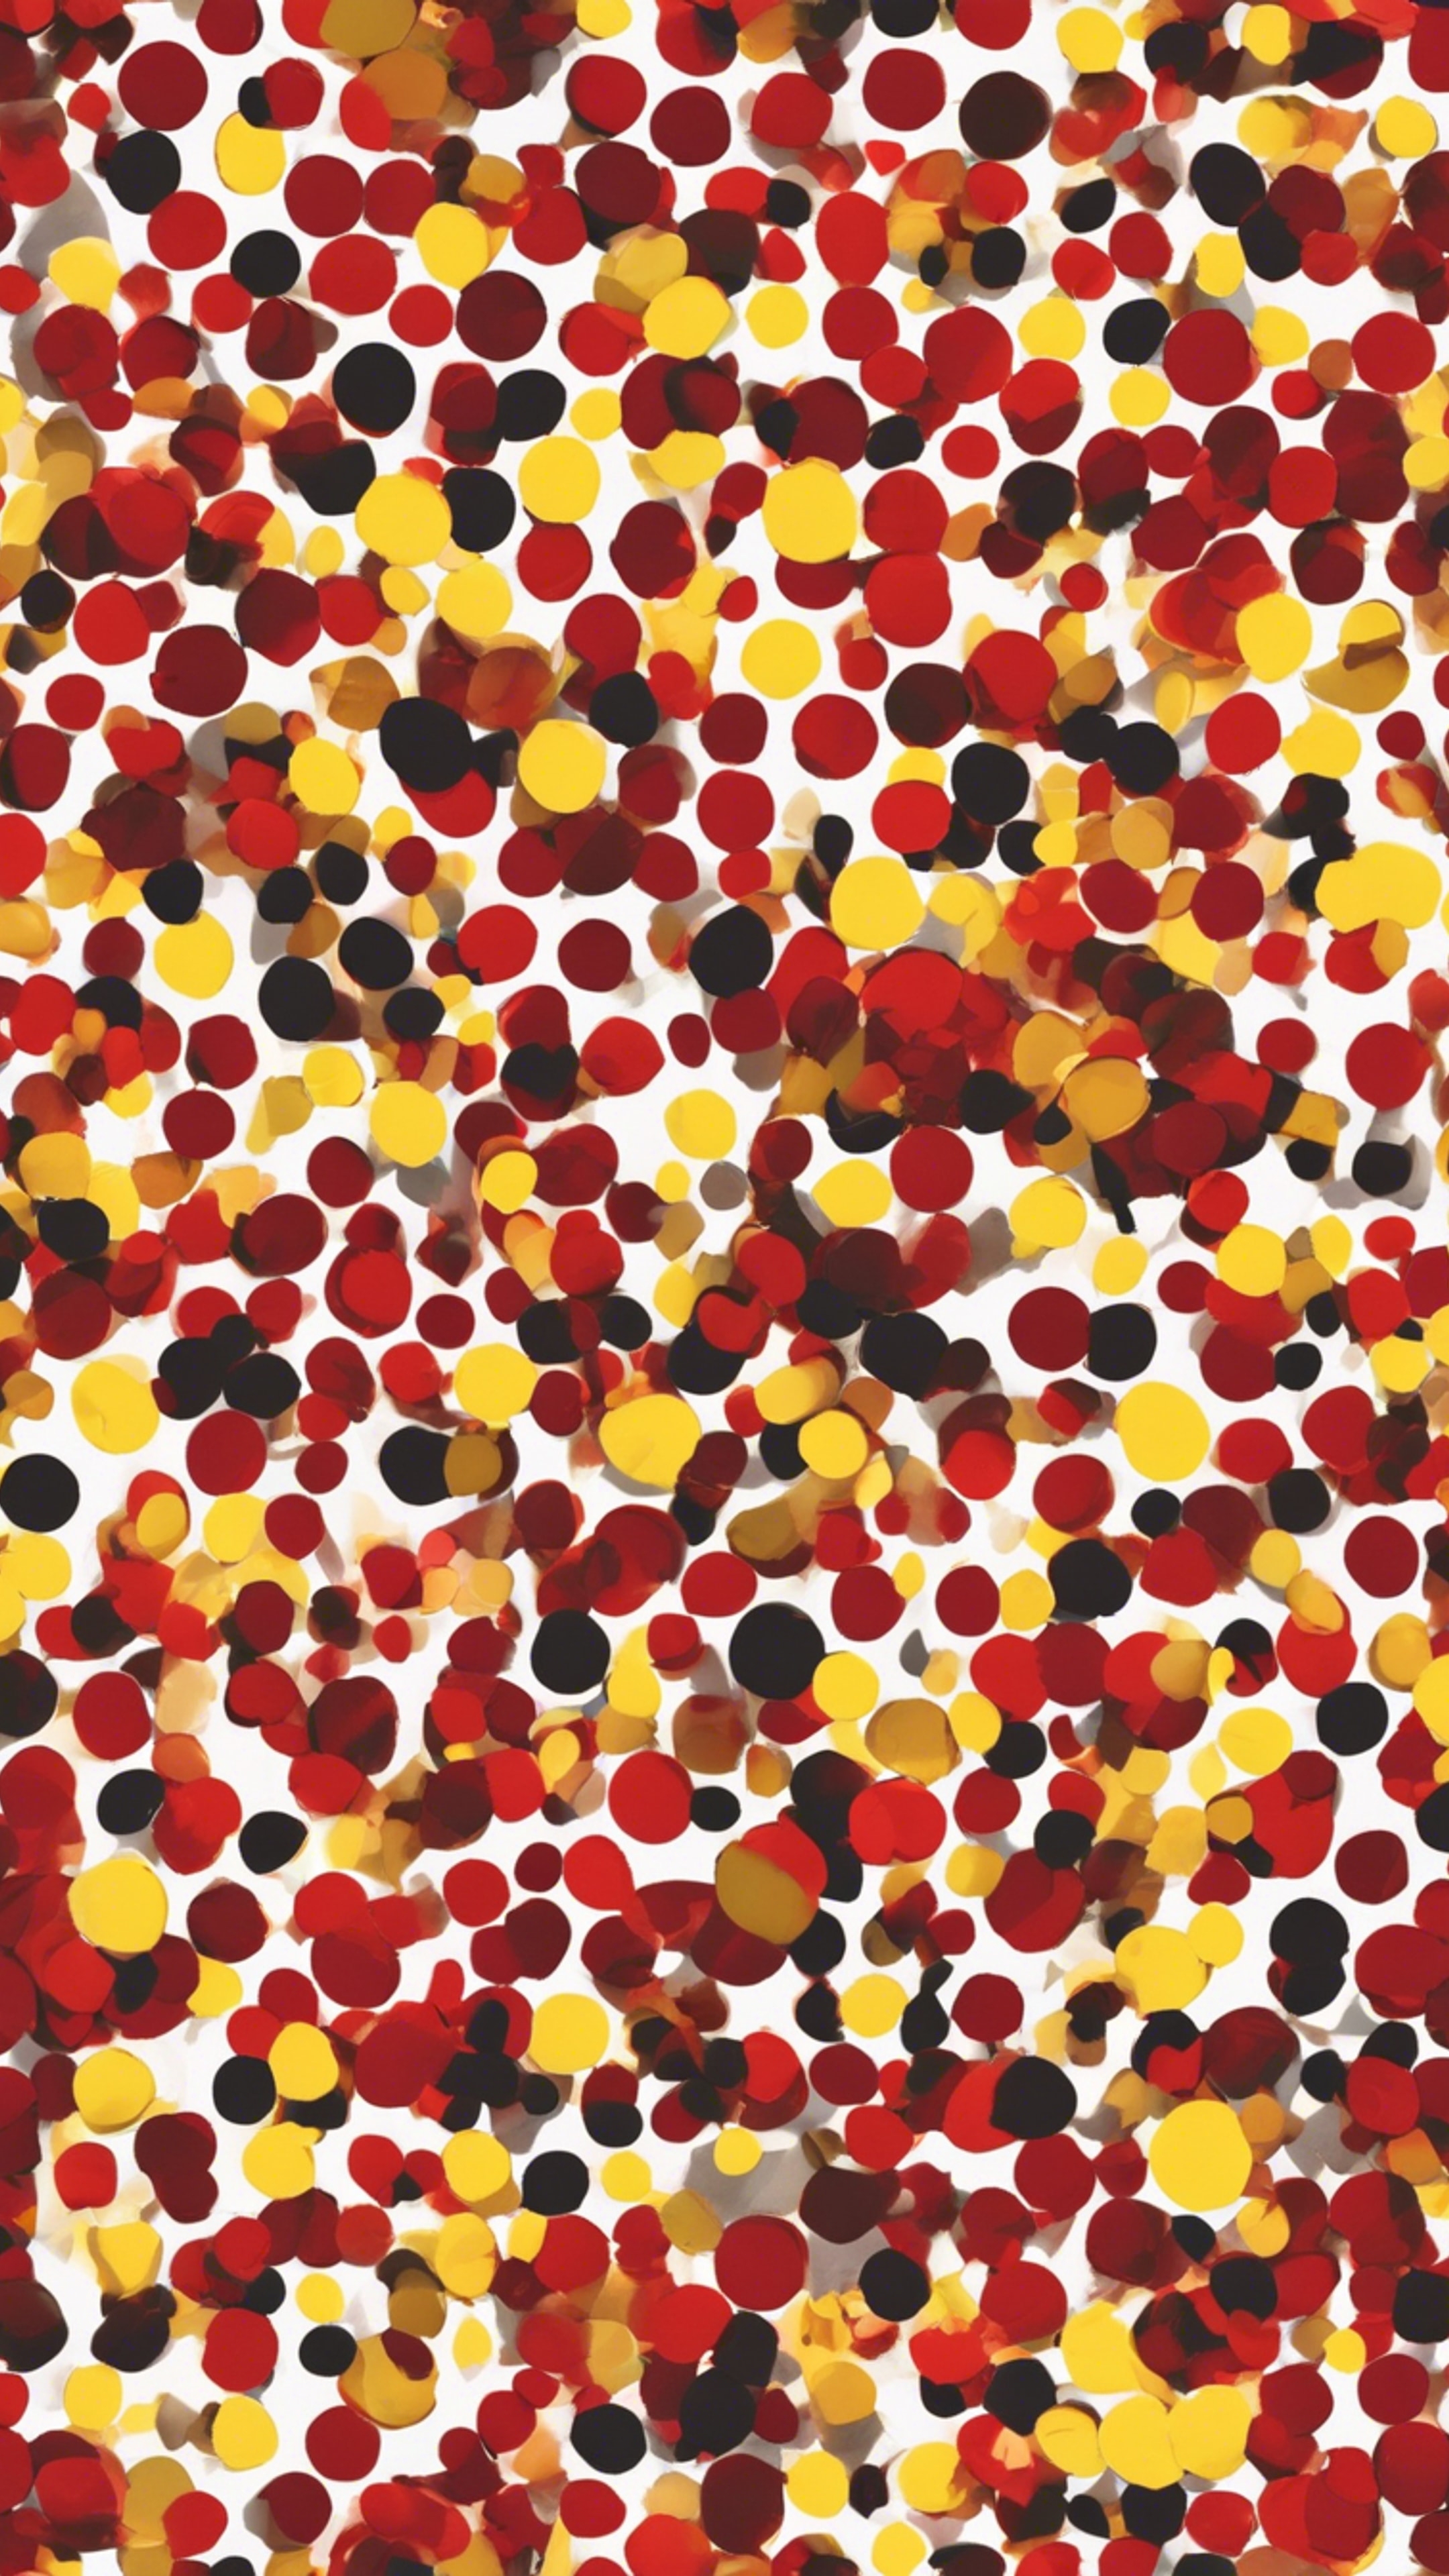 Scattered polka dots, small red ones and large yellow ones, in a seamless pattern. Tapetai[491989b84cbb438494fe]